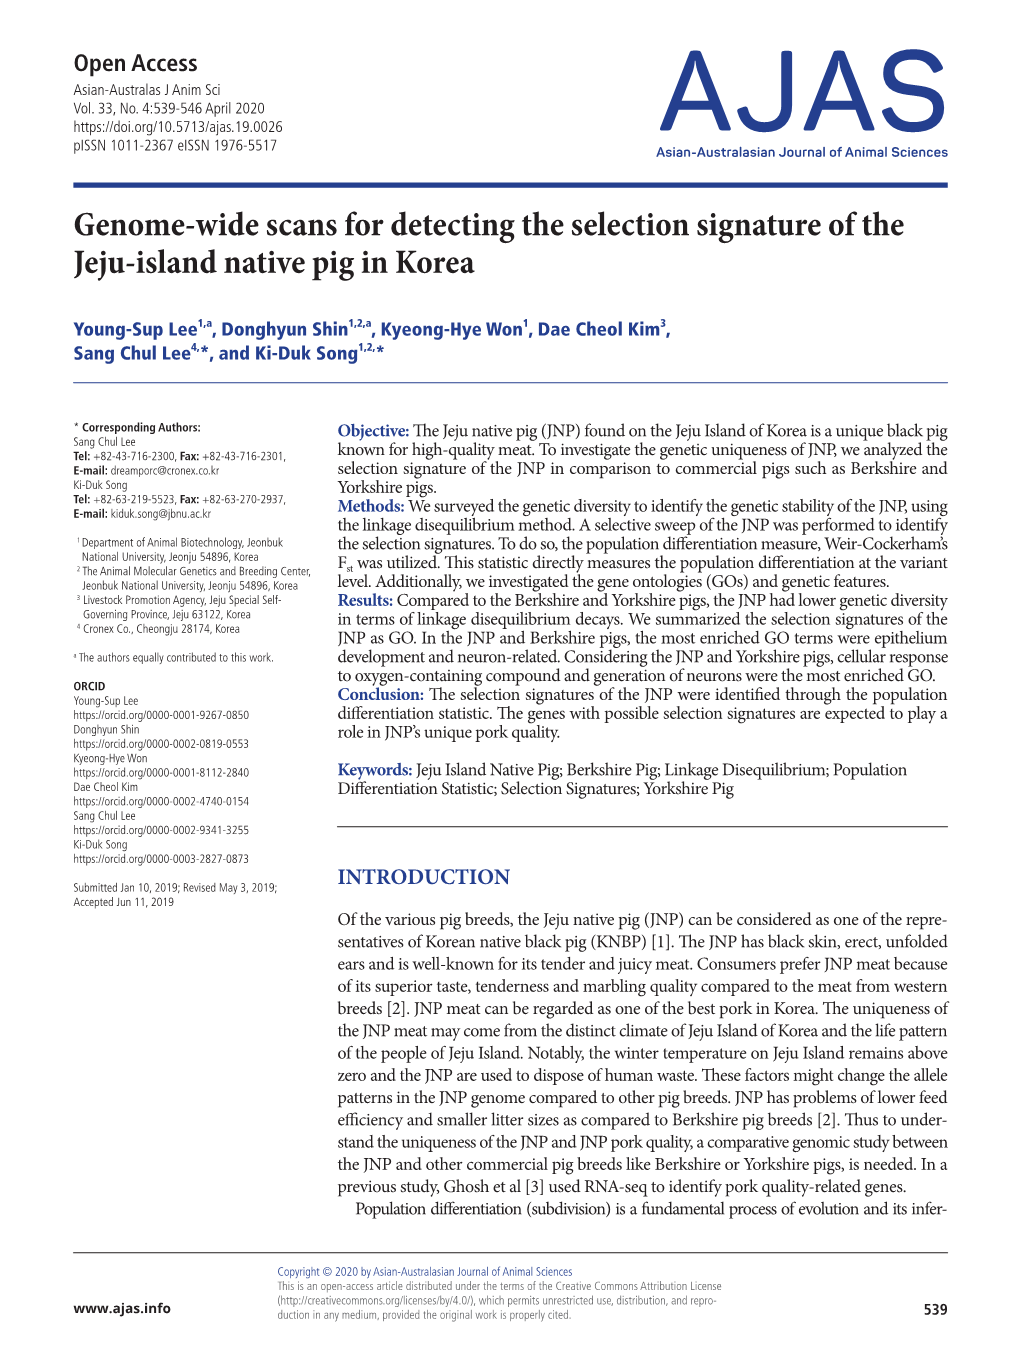 Genome-Wide Scans for Detecting the Selection Signature of the Jeju-Island Native Pig in Korea